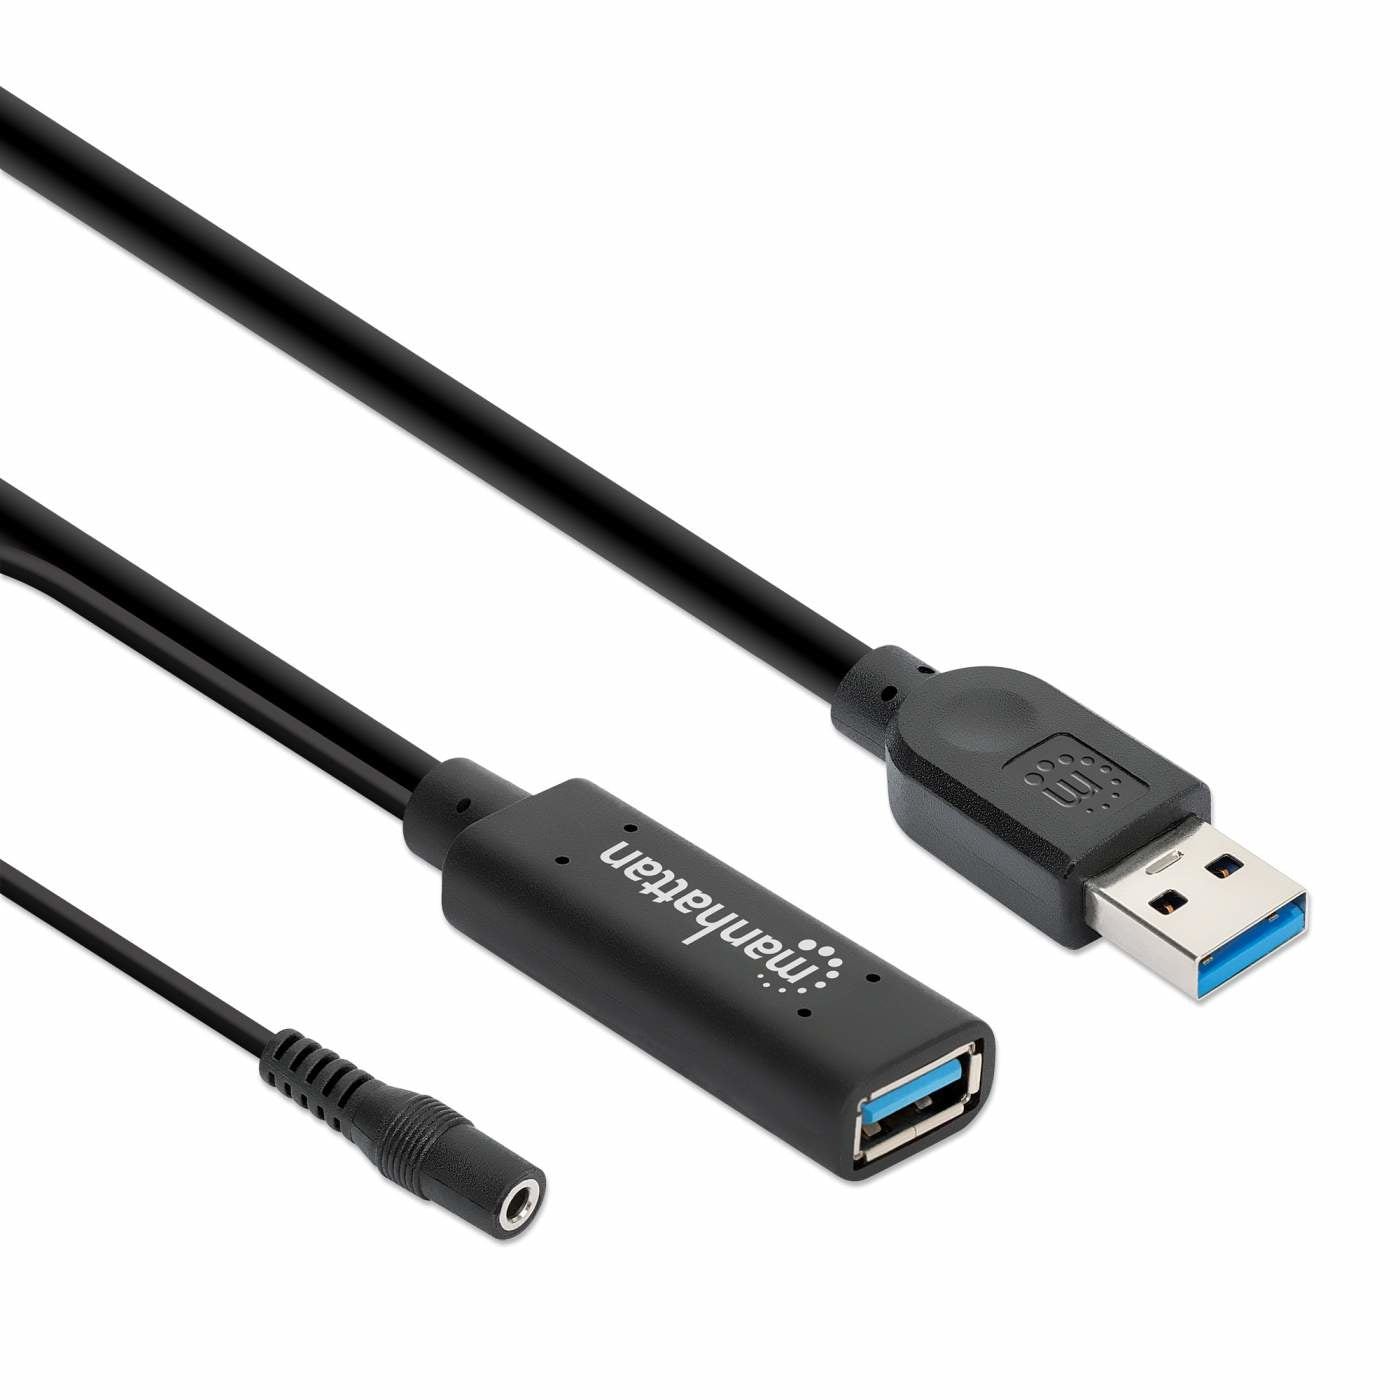 Cable Usb Intellinet 153768 V3.0 Ext. Activa 15.0M Negro